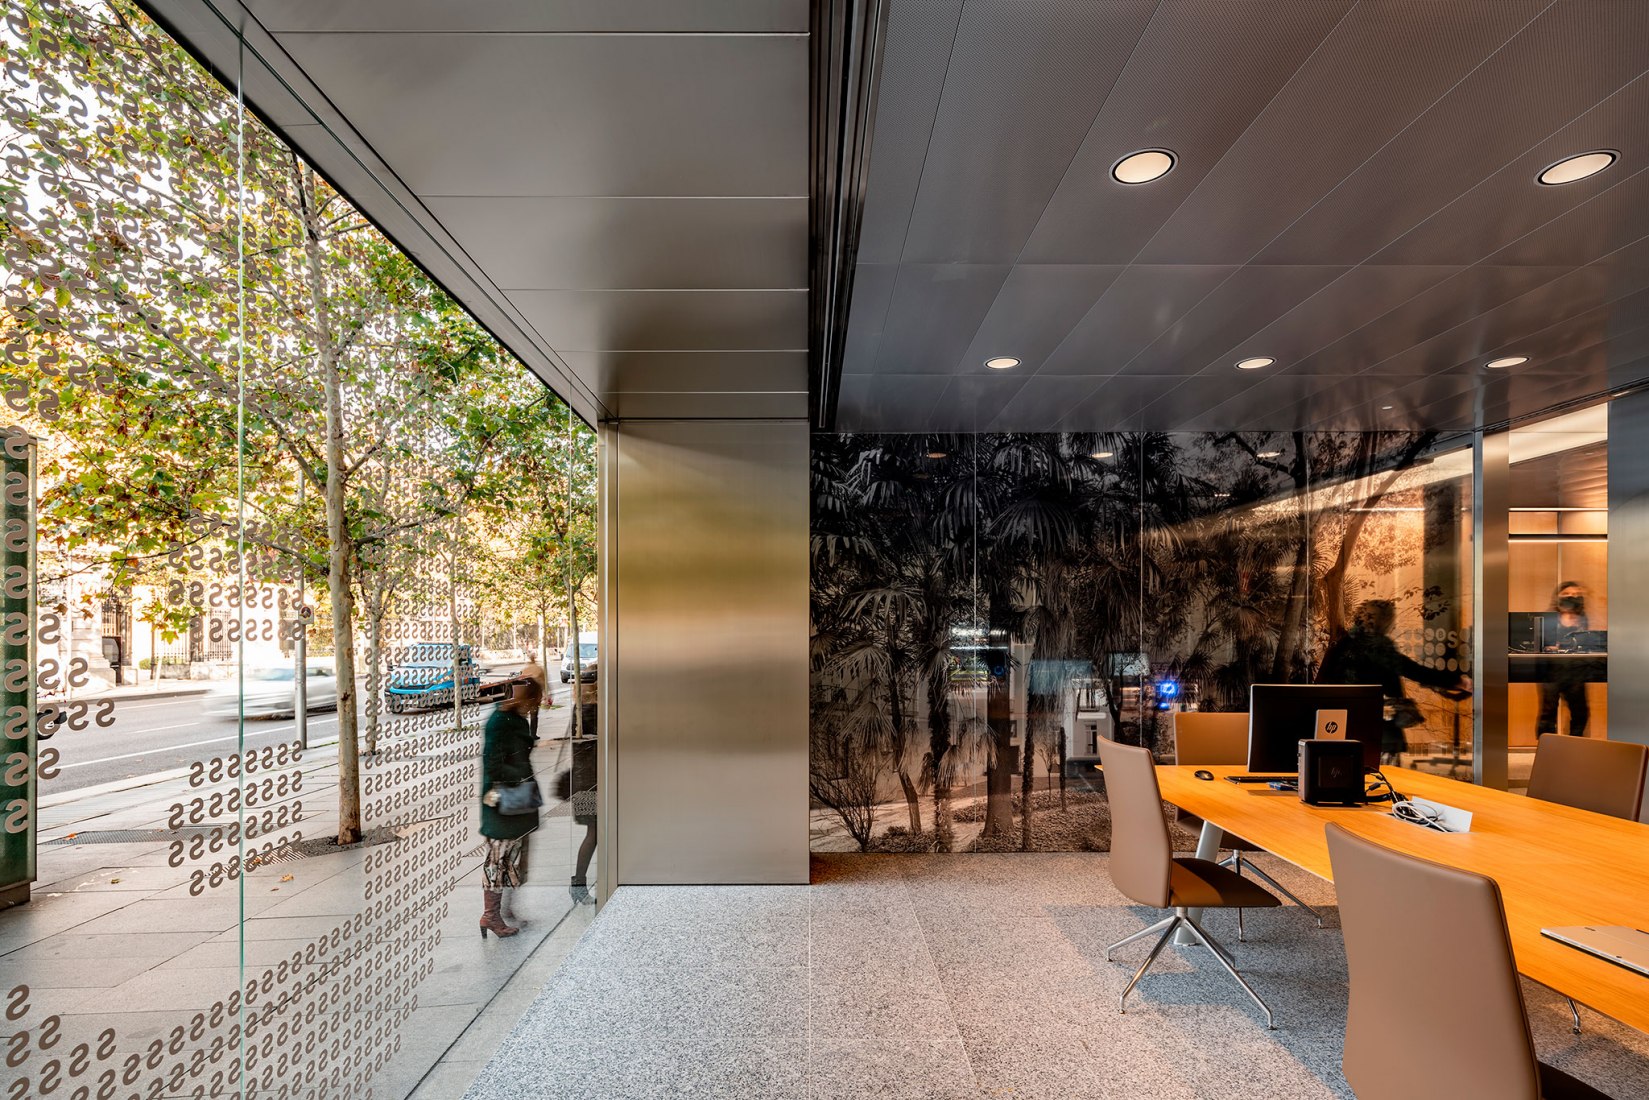 Banc Sabadell Space by mateo arquitectura. Photograph by Pedro Pegenaute.